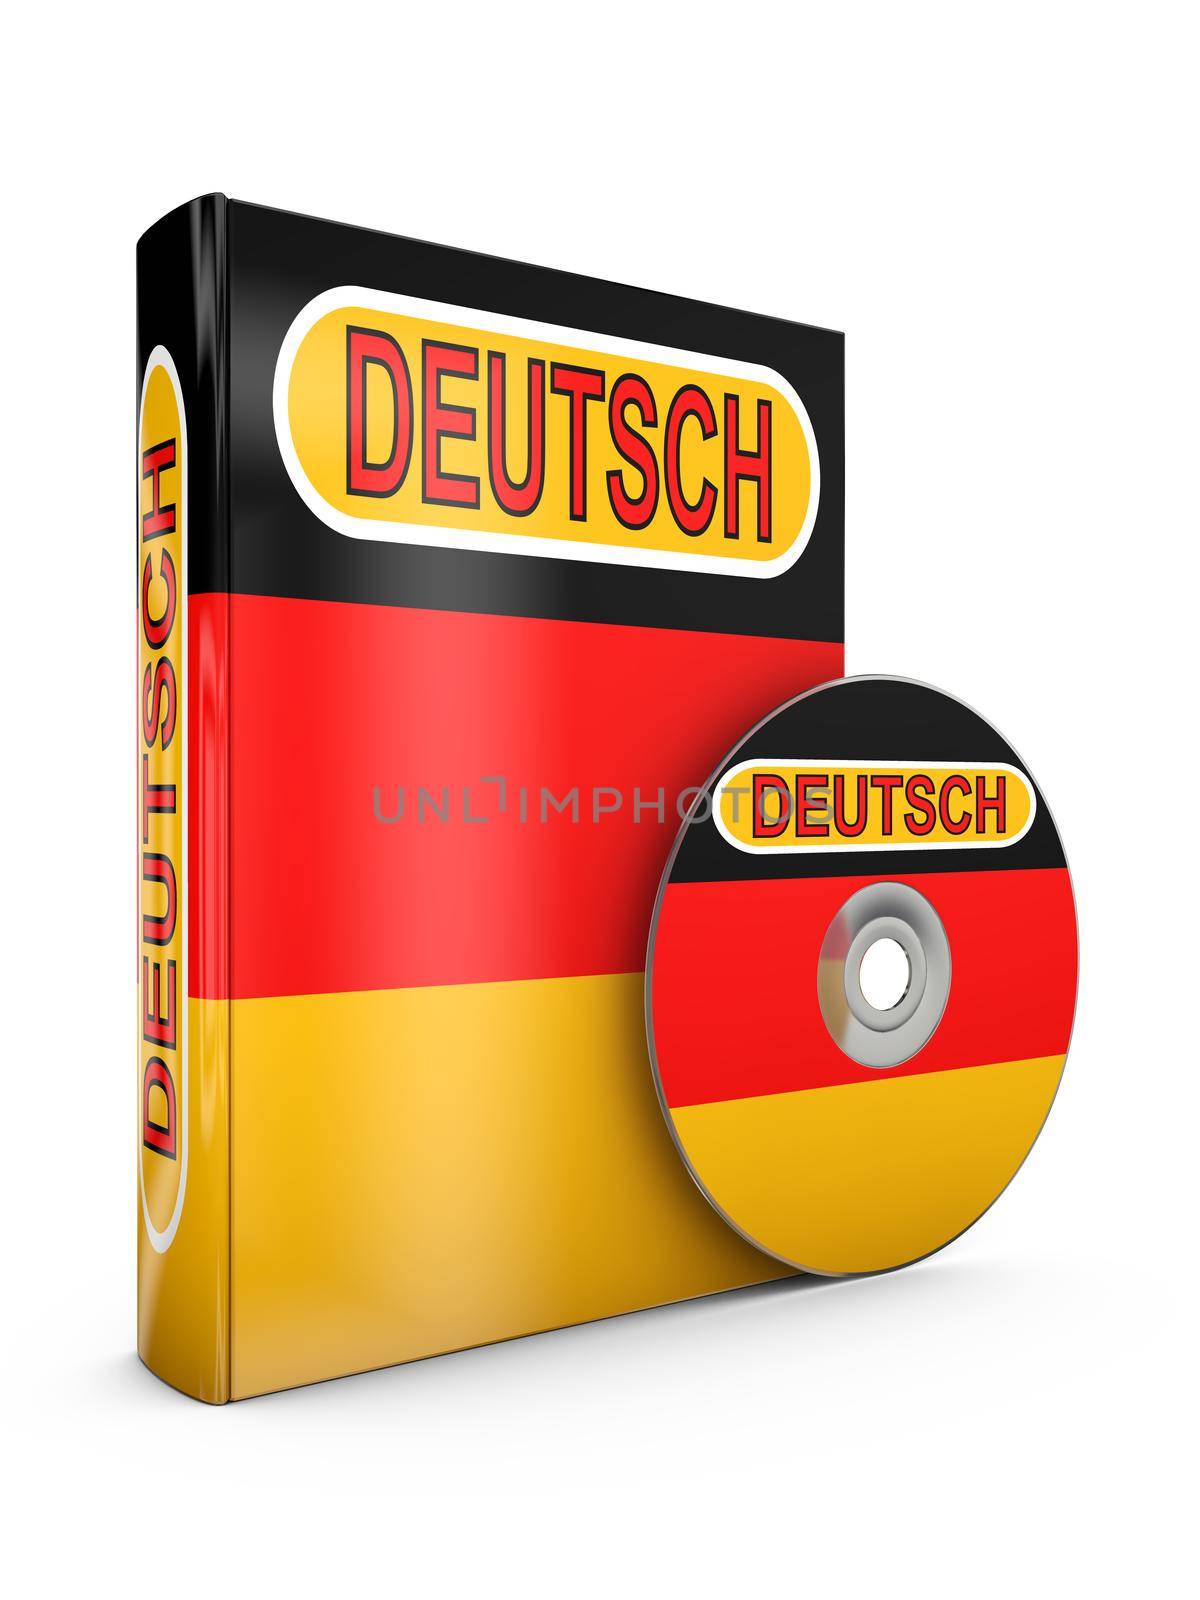 book and a CD with the image of the flag of Germany and the inscription - German